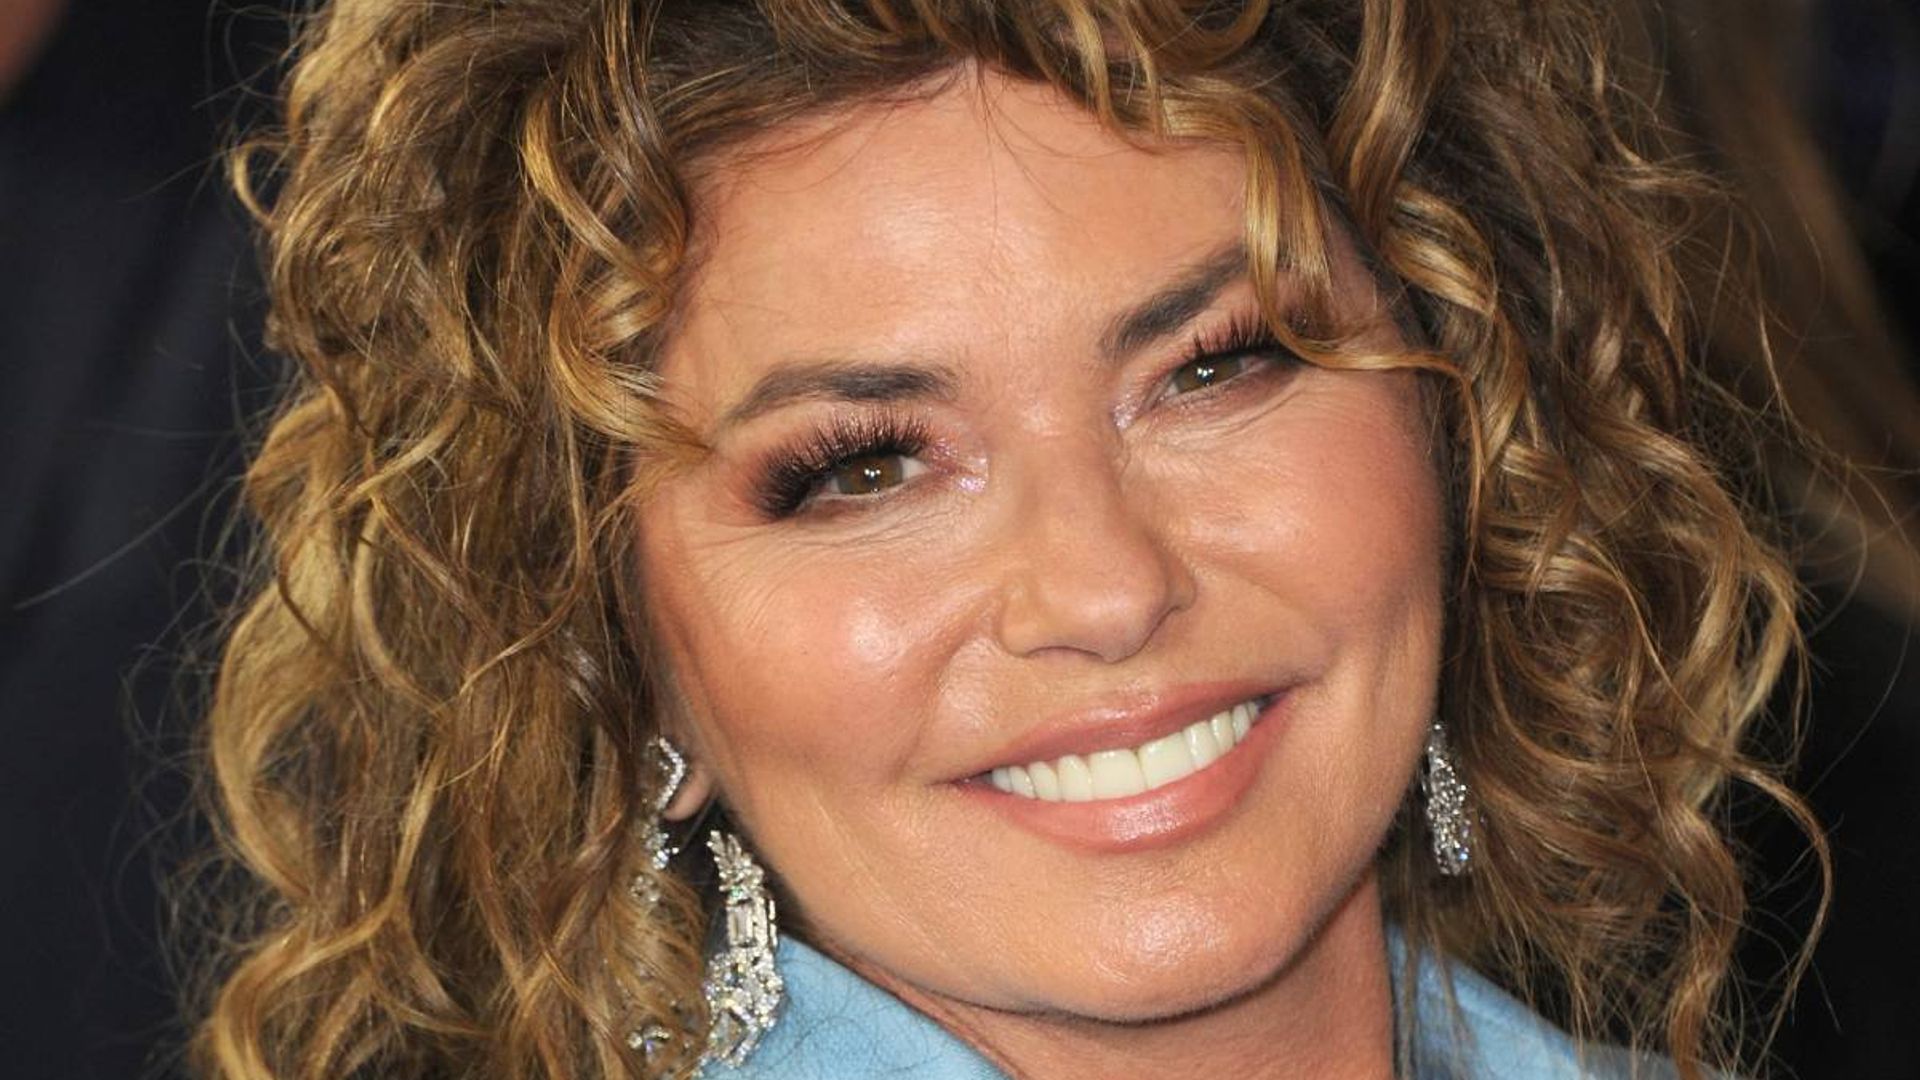 Shania Twain wows in leopard print in stunning selfie during London visit